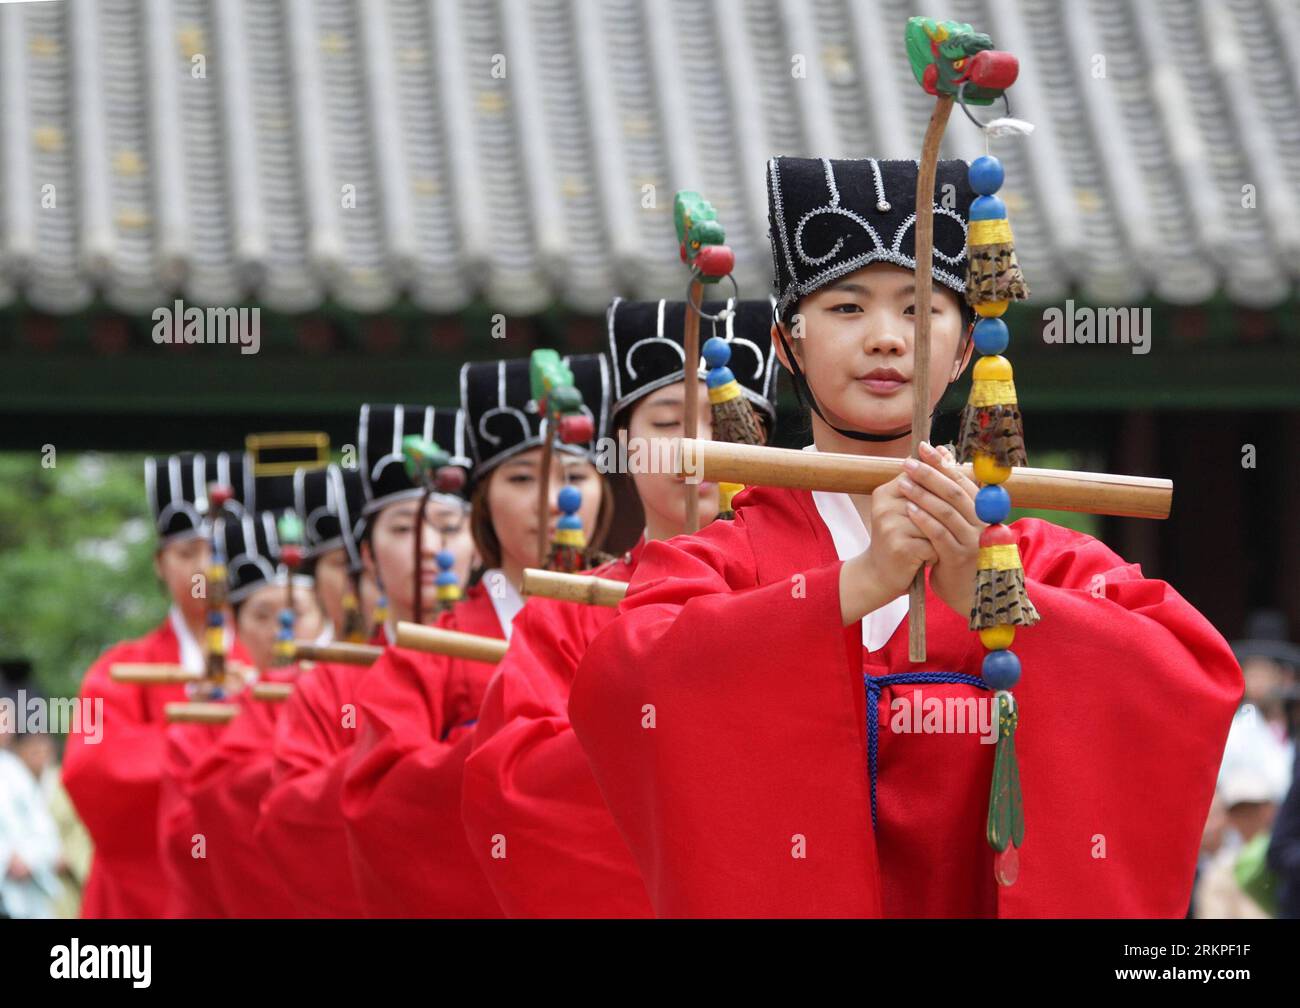 Bildnummer: 57979828  Datum: 11.05.2012  Copyright: imago/Xinhua (120511) -- SEOUL, May 11, 2012 (Xinhua) -- College students wearing traditional costumes perform traditional ritual at a Confucian shrine in Seoul, South Korea, May 11, 2012. The Confucius ritual is staged twice a year at the Confucian Shrine at Sungkyunkwan University in Seoul, which was built during the Joseon Dynasty in 1398 for Korean Confucian scholars to honor Confucius. (Xinhua/Park Jin-hee) SOUTH KOREA-SEOUL-CONFUCIUS RITUAL PUBLICATIONxNOTxINxCHN Gesellschaft xda x2x 2012 quer  o0 Konfuzianismus Tradition Bildung Uni St Stock Photo